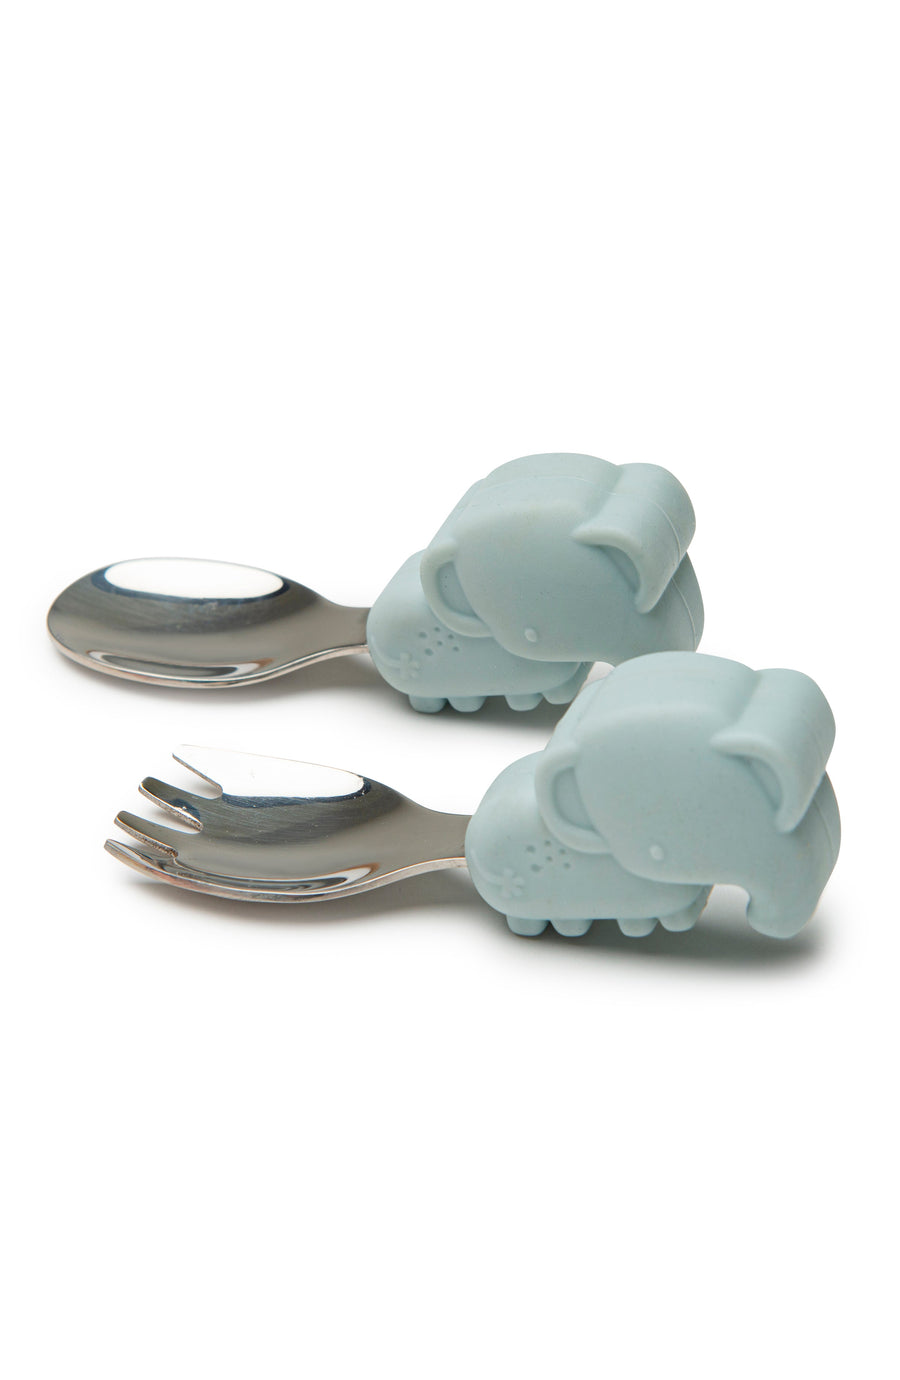 Born to be Wild Learning spoon/fork set Eat Loulou Lollipop Elephant 